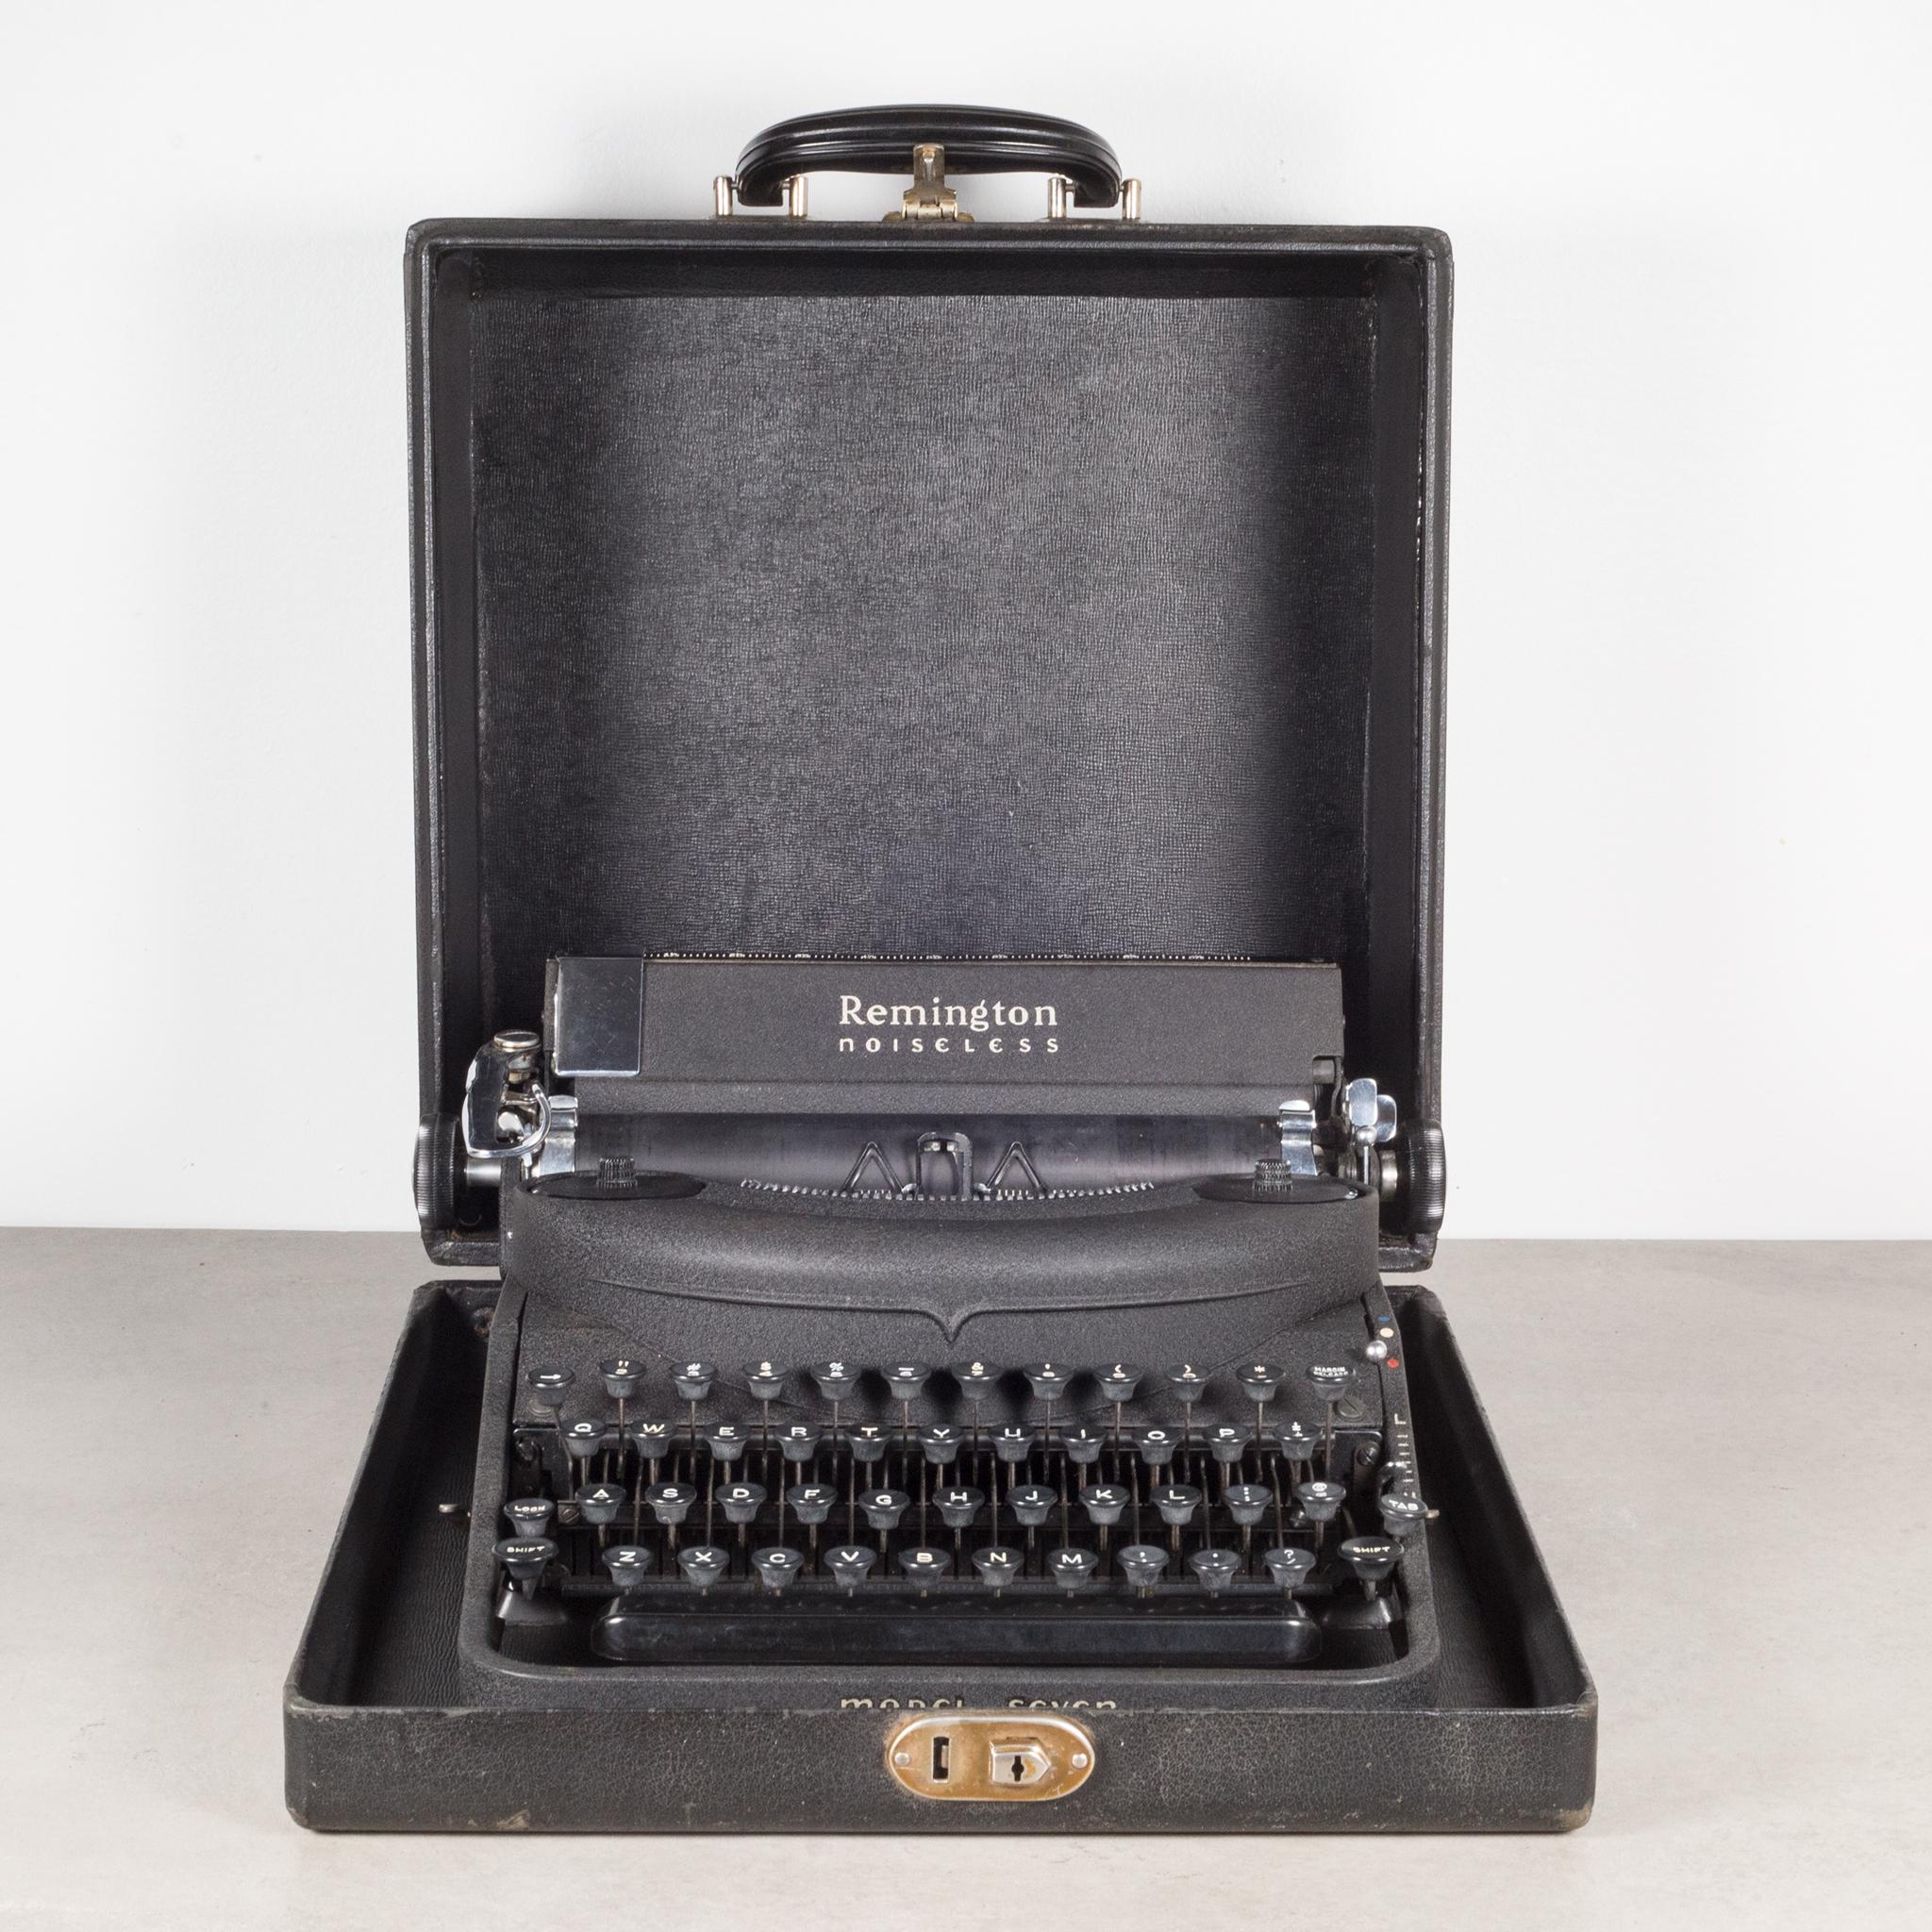 About

An original Remington Rand Portable Noiseless Model Seven Typewriter with black crinkle finish and original case. This typewriter is very clean and has been fully refurbished. It has smooth typing and the carriage advances and functions